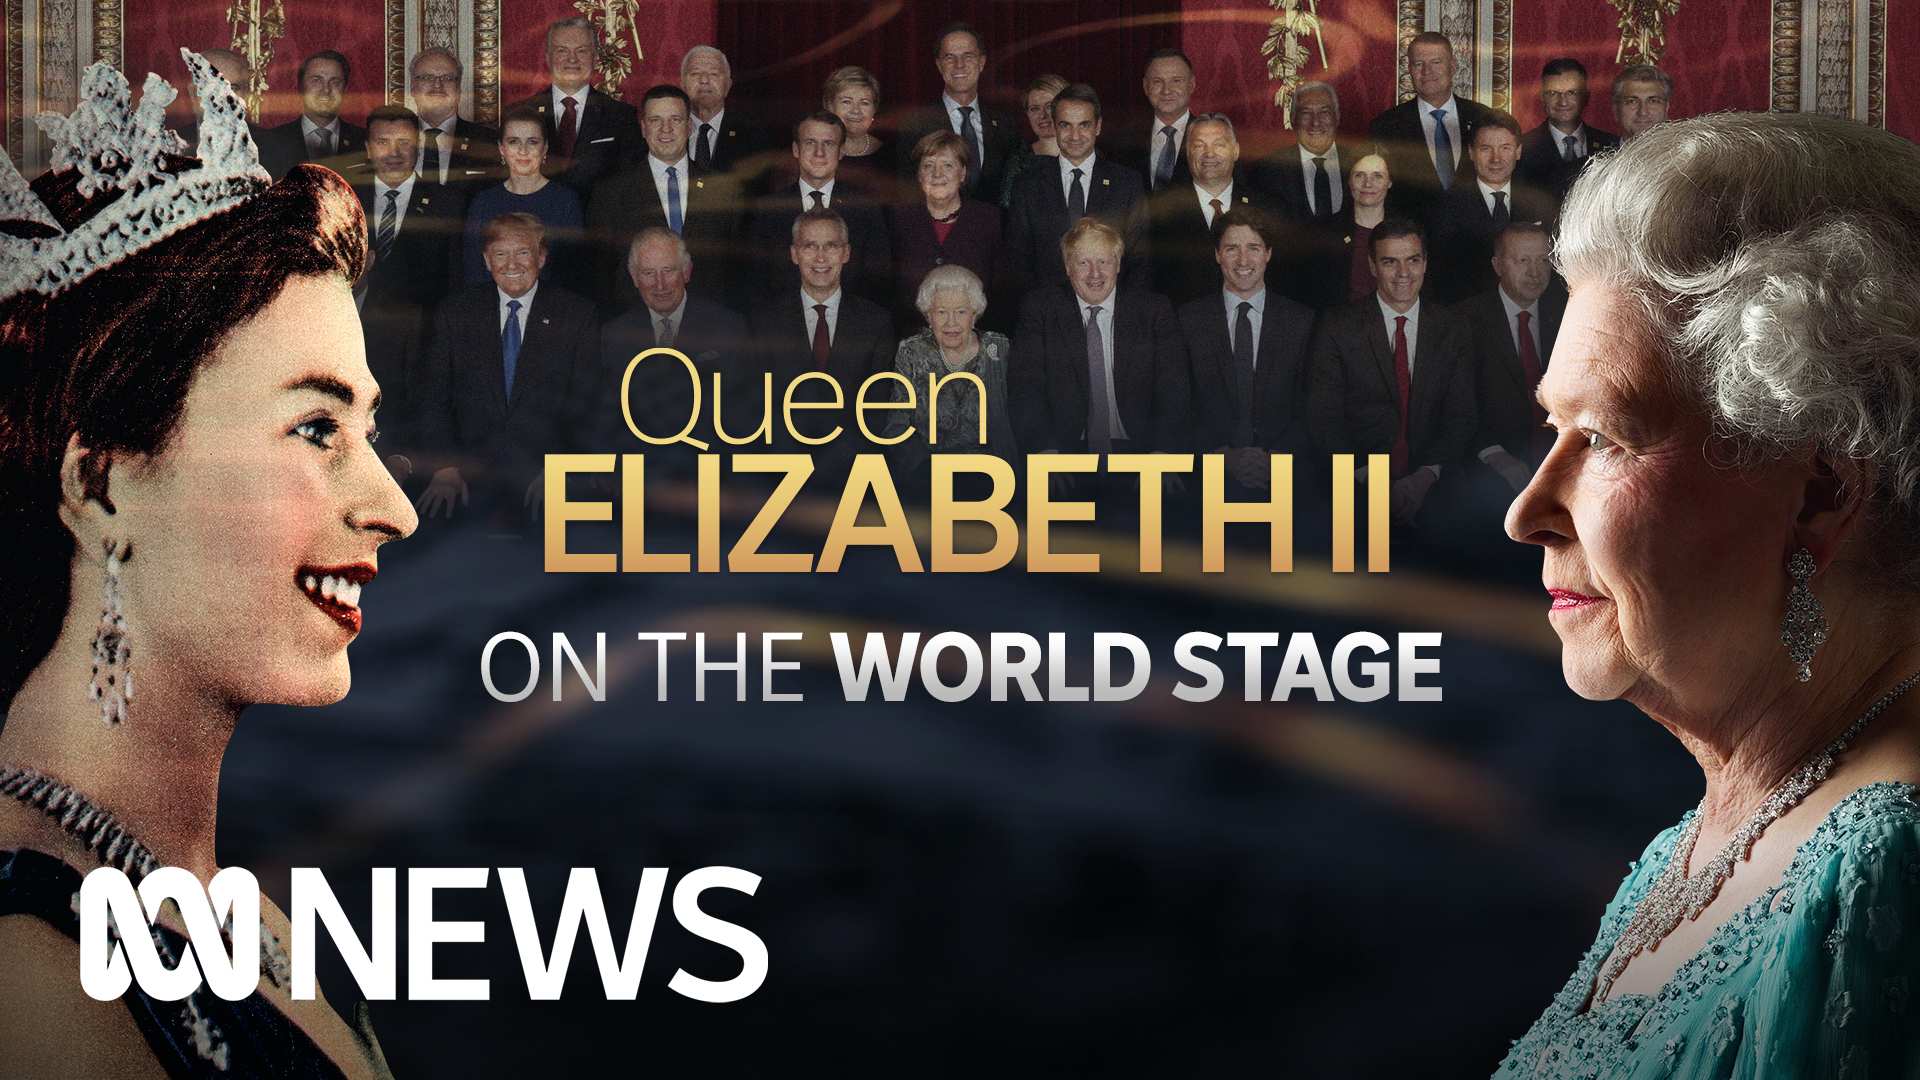 Queen Elizabeth II as the ultimate diplomat - ABC News